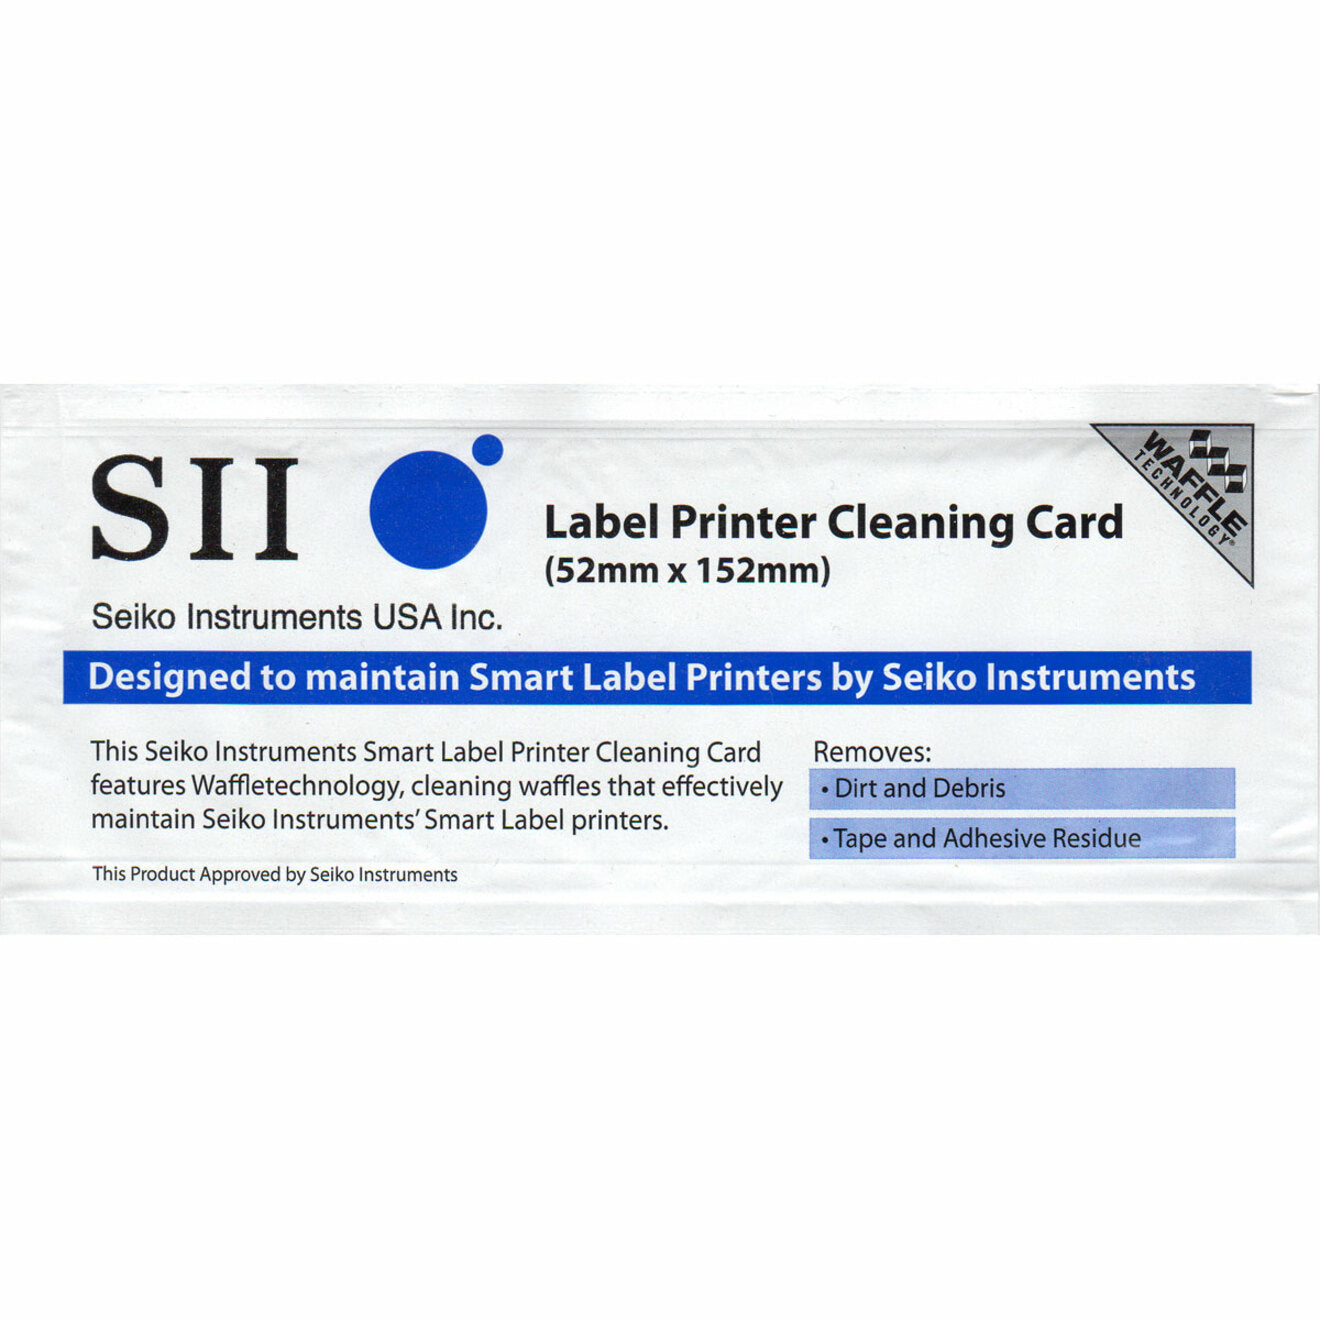 Seiko SLP-CLNCRD Cleaning Card for SLP Printers - Keep Your Printer Running Smoothly